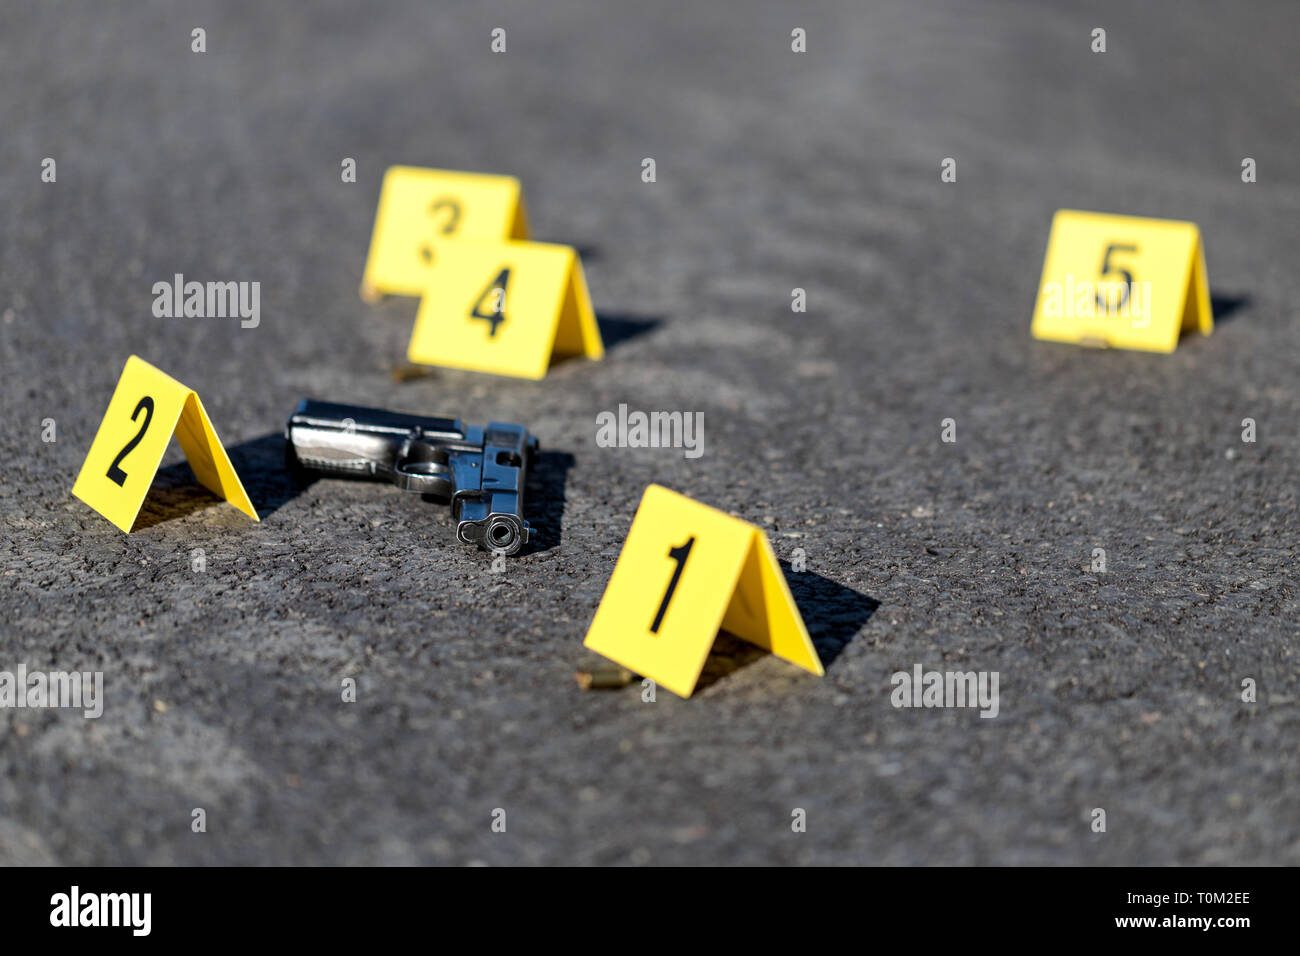 ID tents at crime scene after gunfight Stock Photo